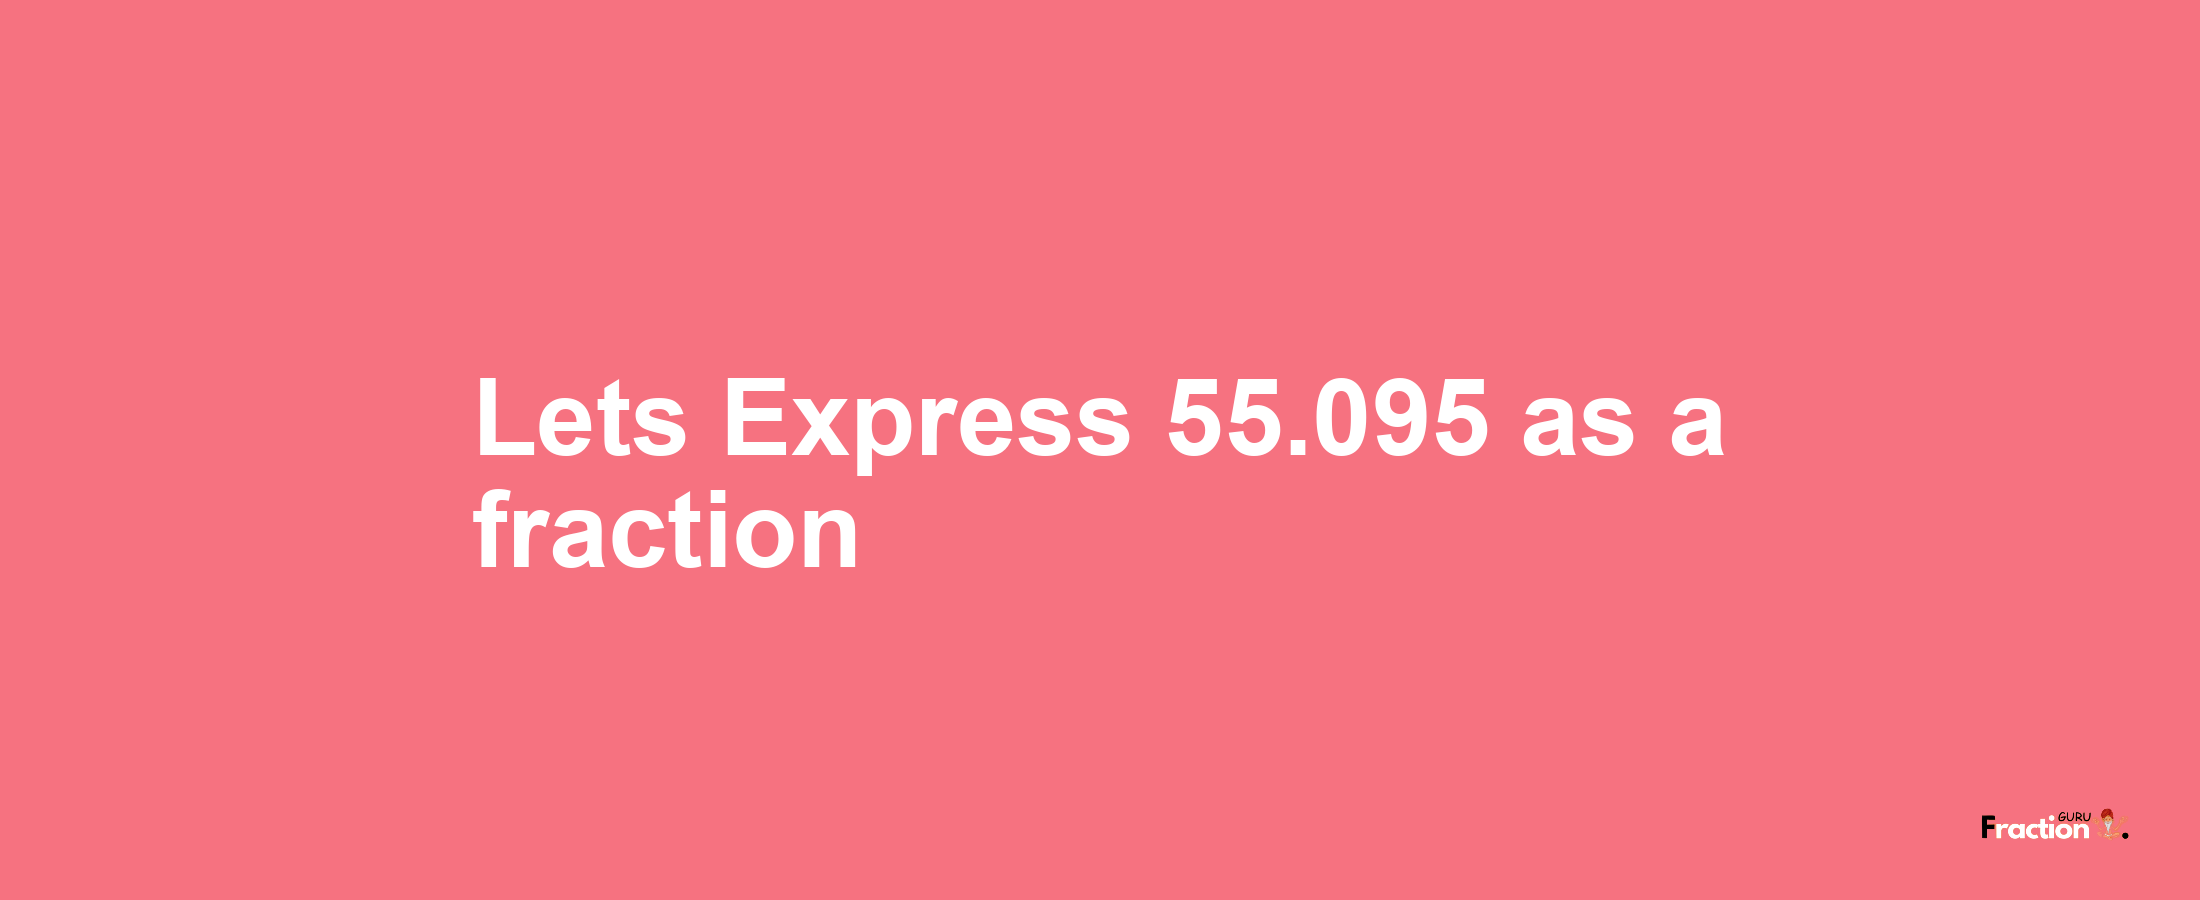 Lets Express 55.095 as afraction